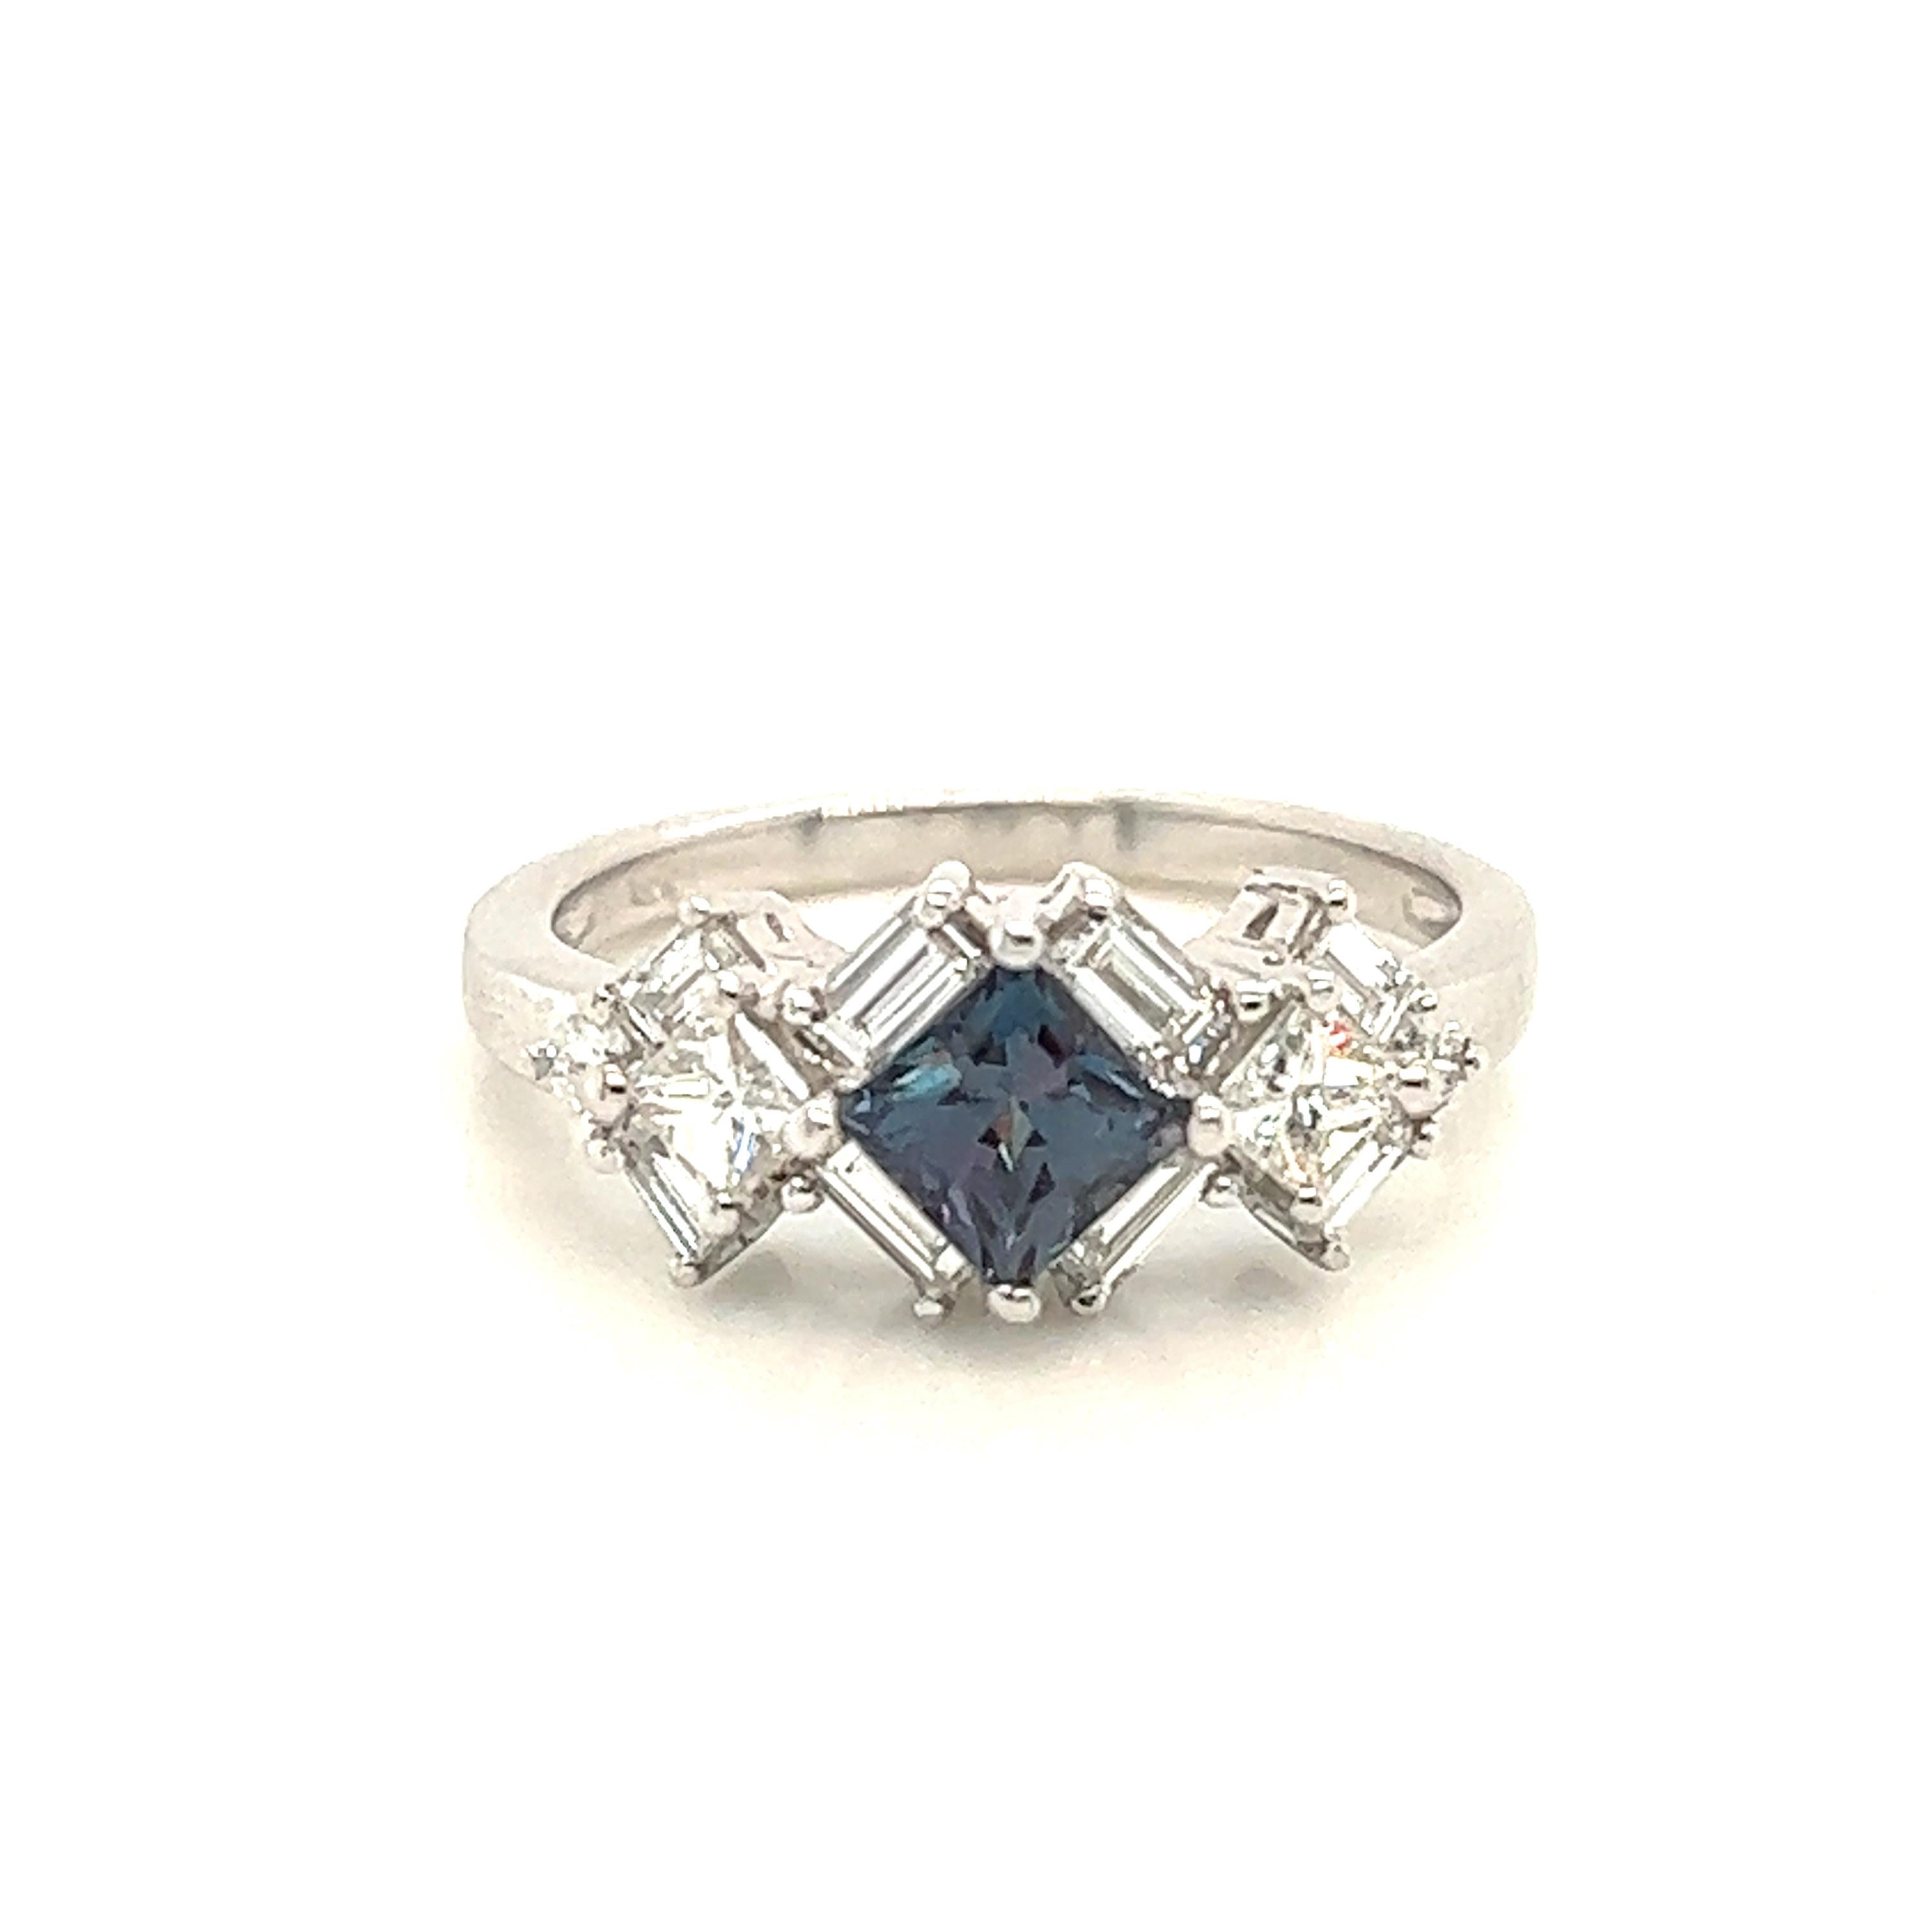 This is a gorgeous natural AAA quality Alexandrite surrounded by dainty diamonds that is set in a vintage setting. This ring features a natural 0.64 carat princess alexandrite that is surrounded by brilliant white diamonds. The ring is a true